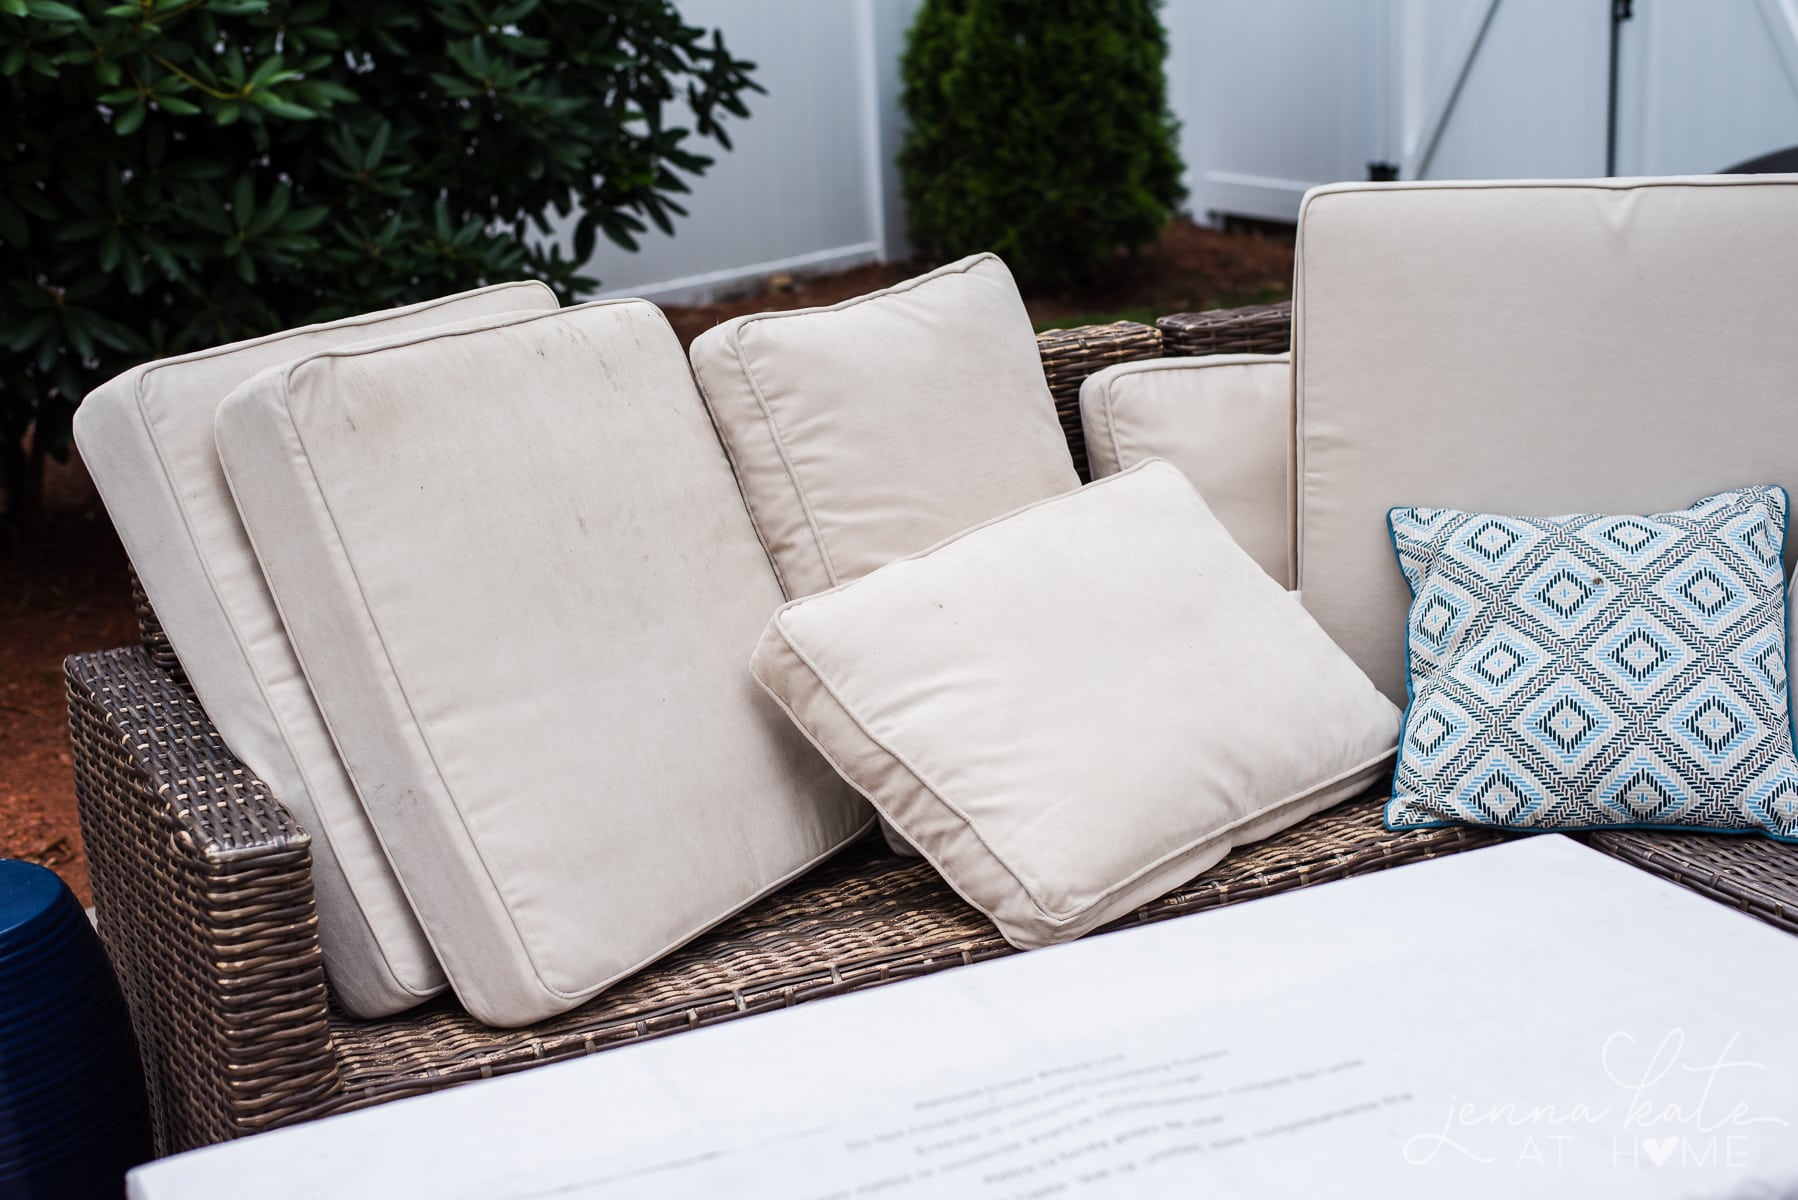 How To Clean Outdoor Cushions Jenna, How To Clean An Outdoor Cushion